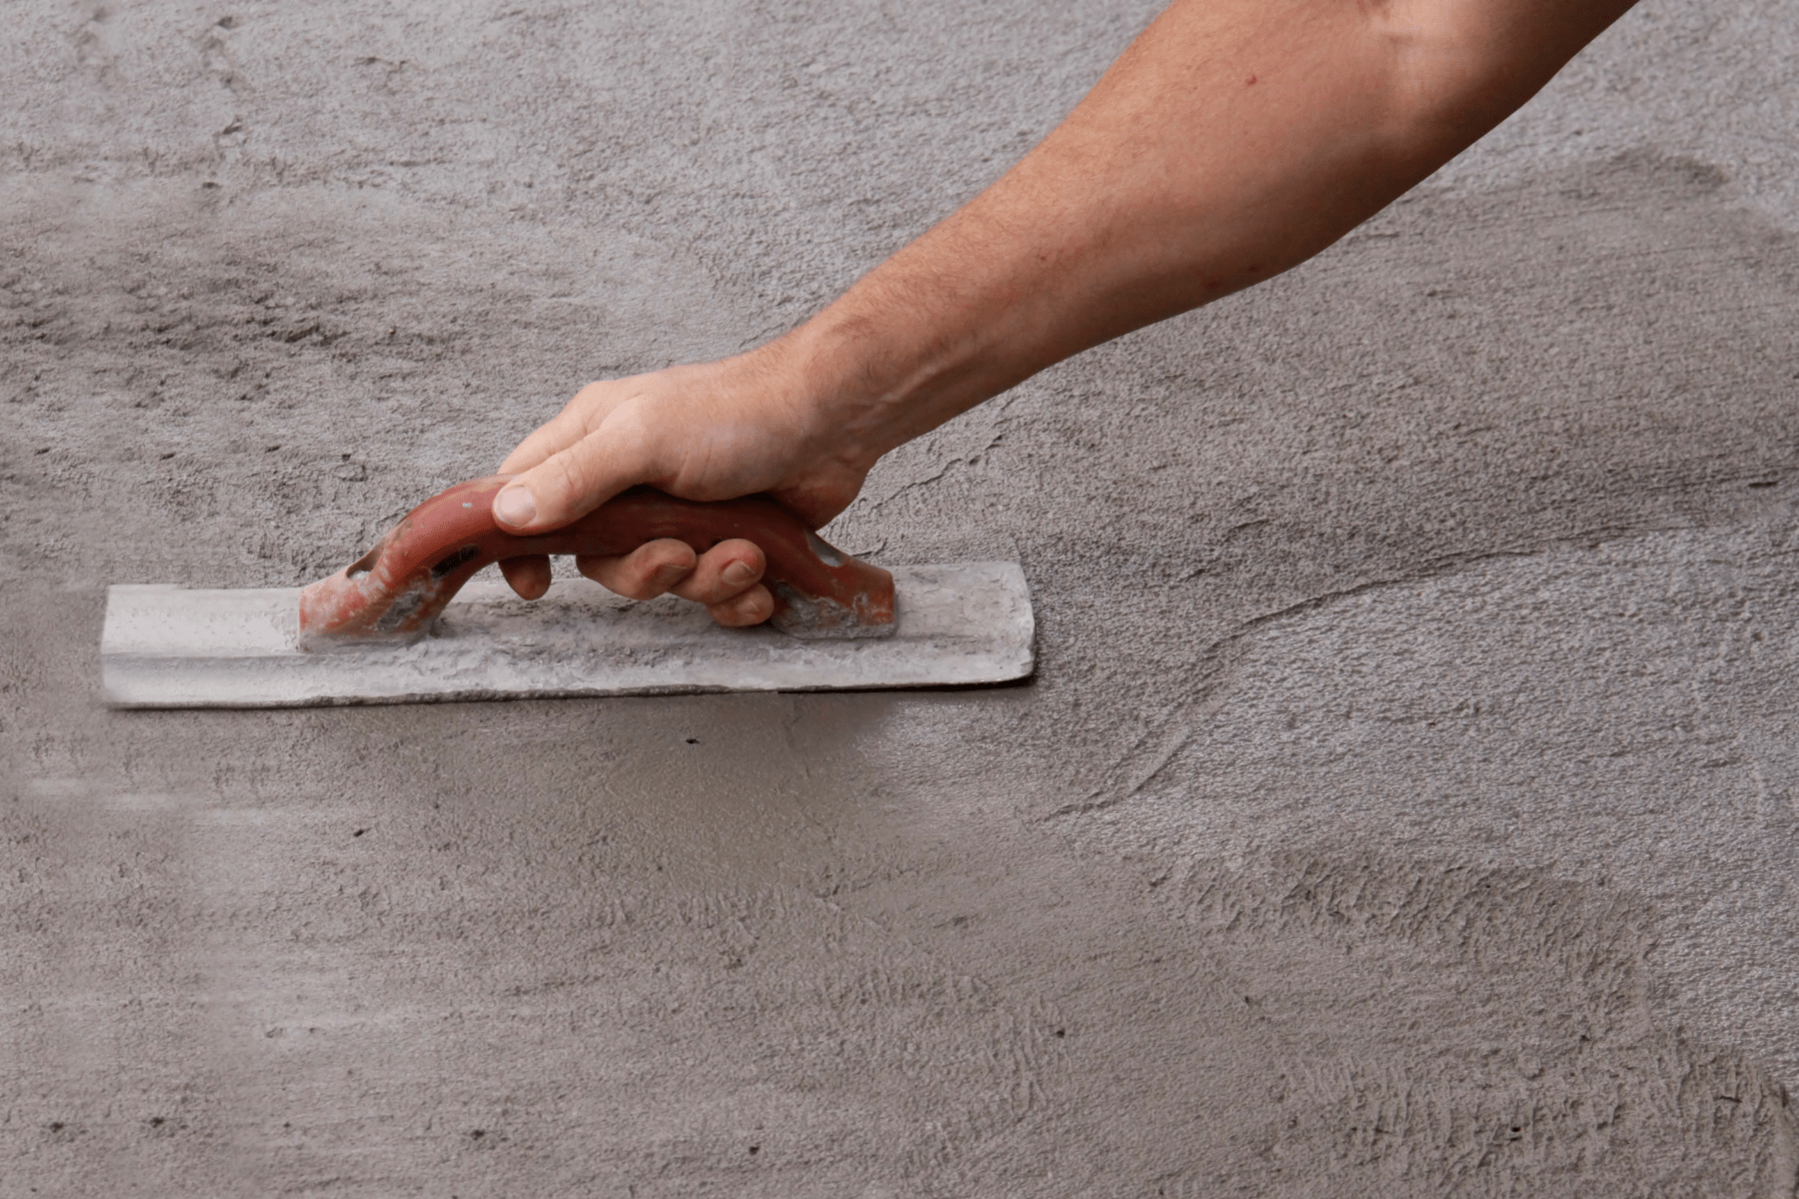 How To Finish A Concrete Slab 7 Steps to Concrete Finishing